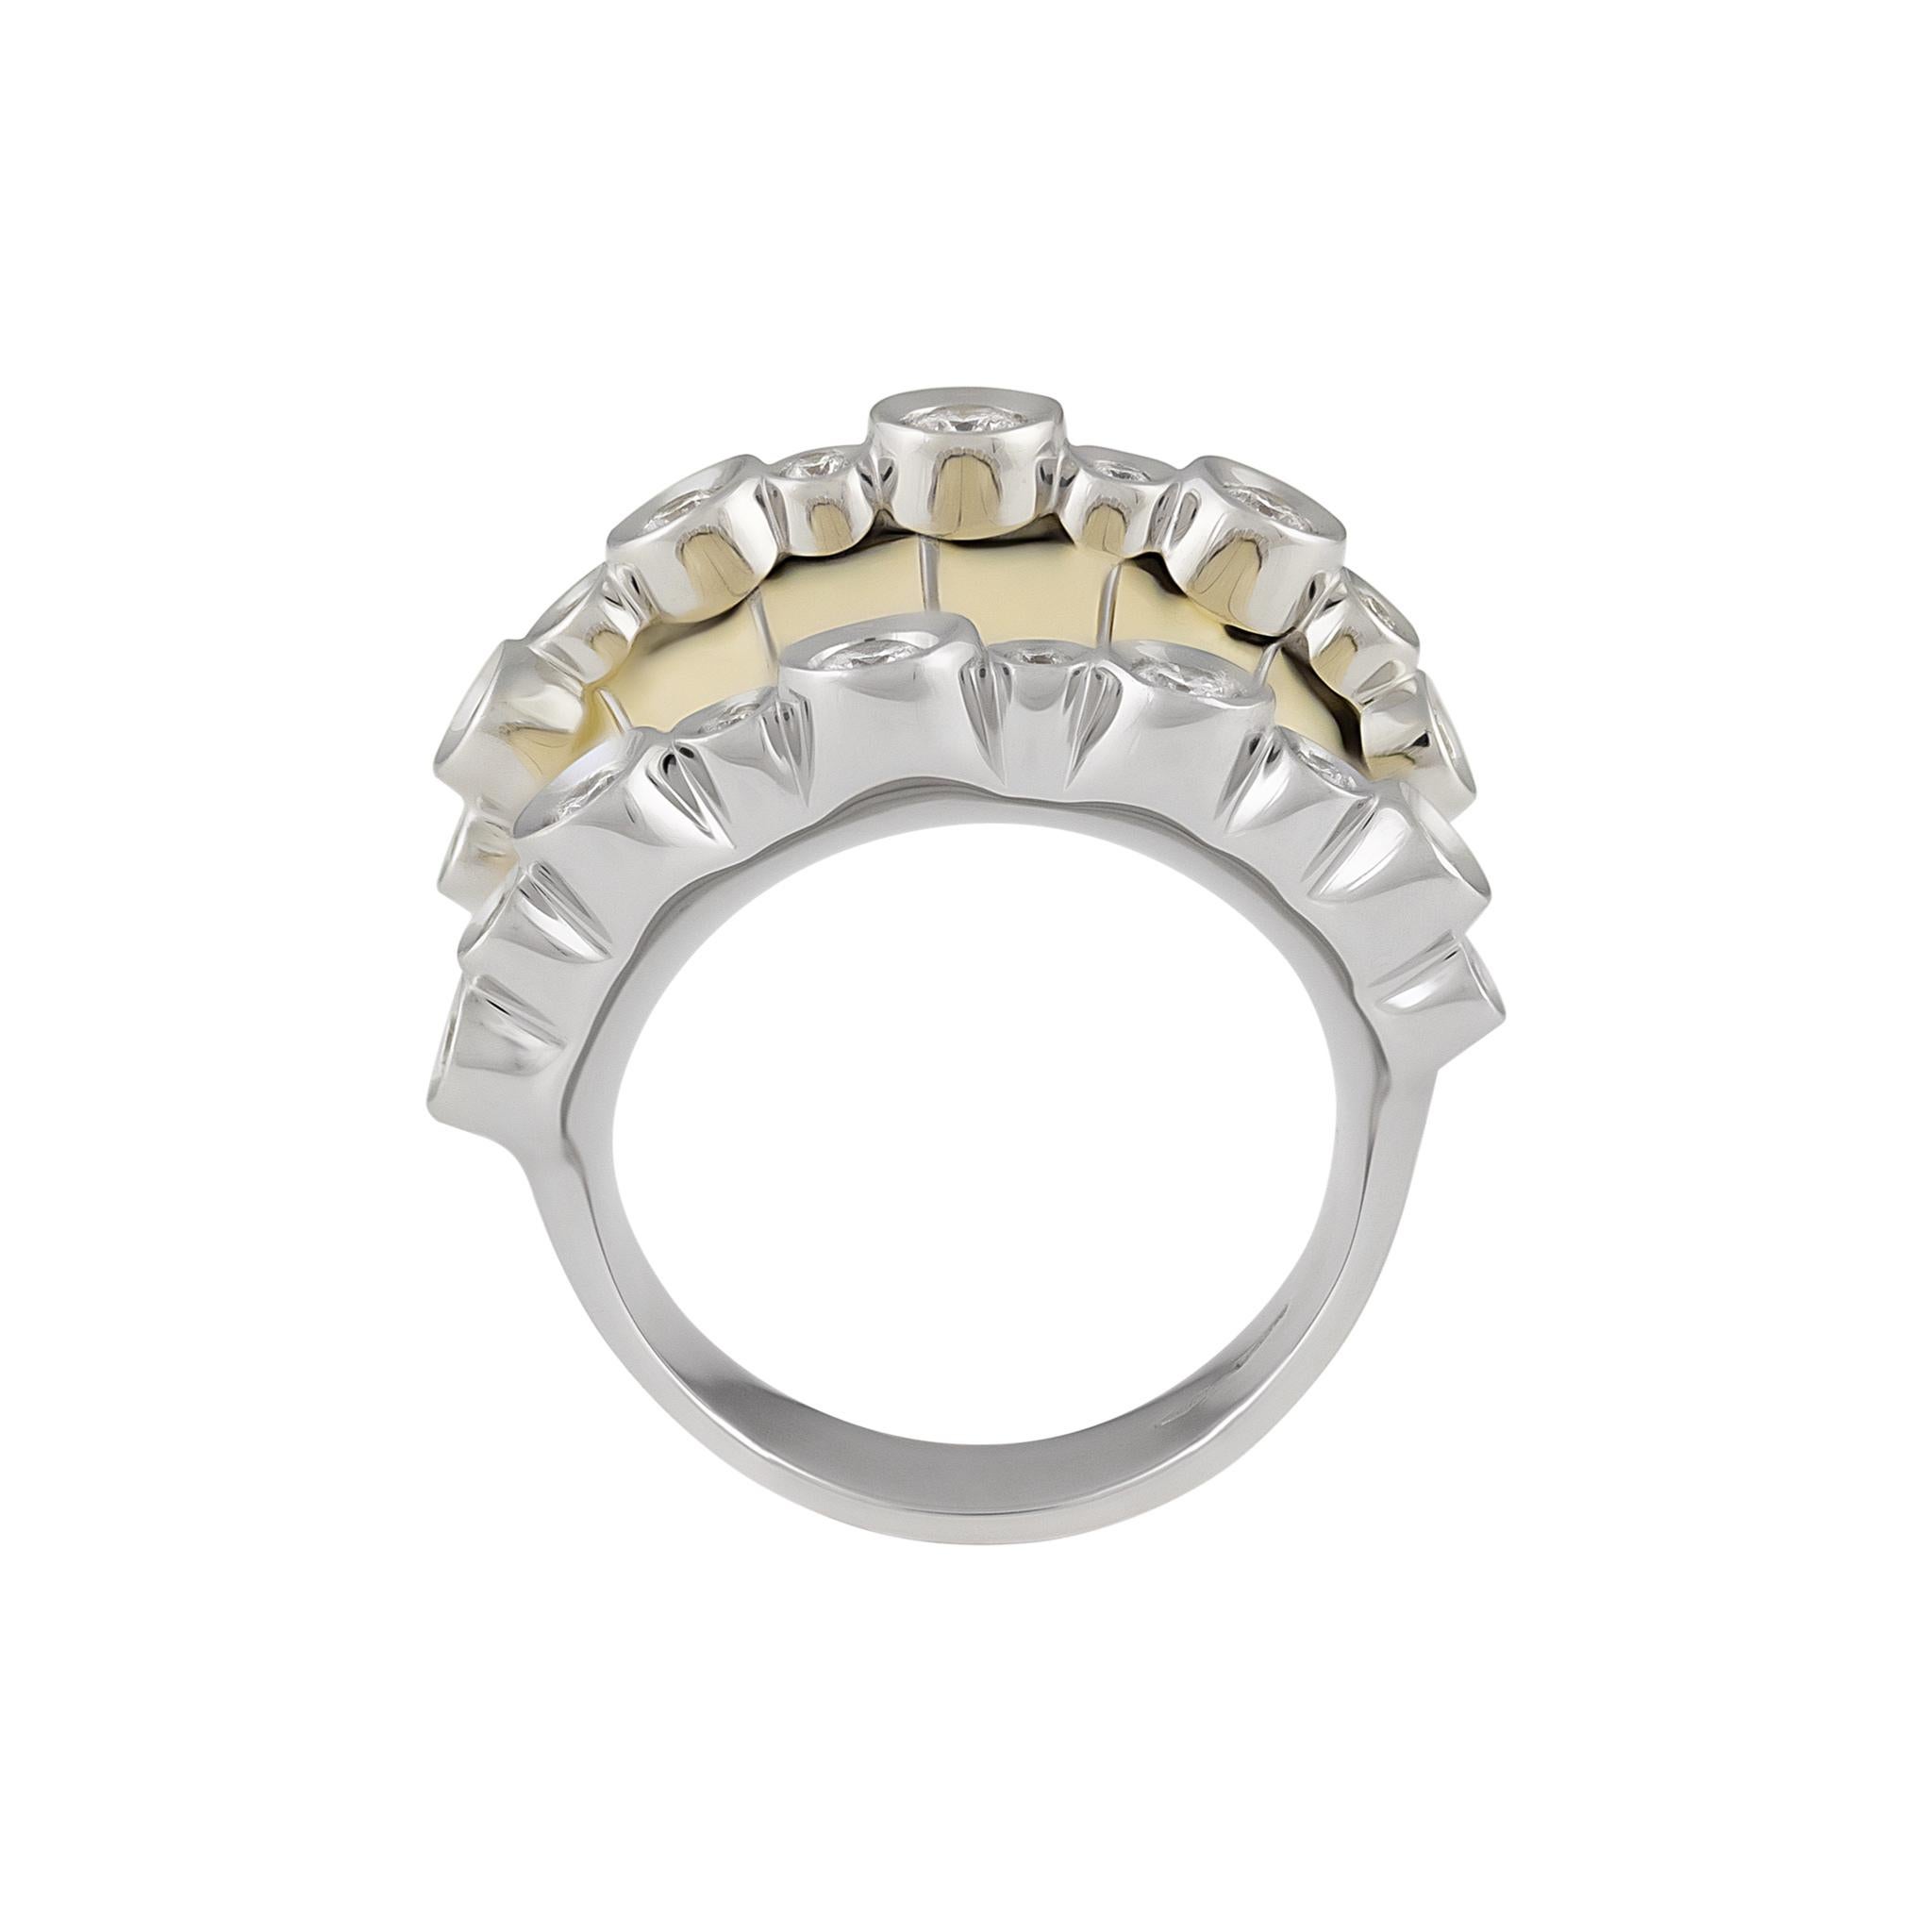 Stefan Hafner Ring
Diamond: 0.79ctw
Size: 7.25
Italian made
SKU: BLU01125
Retail price: $11,000.00
Stefan Hafner jewels are dreams of light that become high jewelry pieces with the purest stones and excellent Italian craftsmanship. The collections